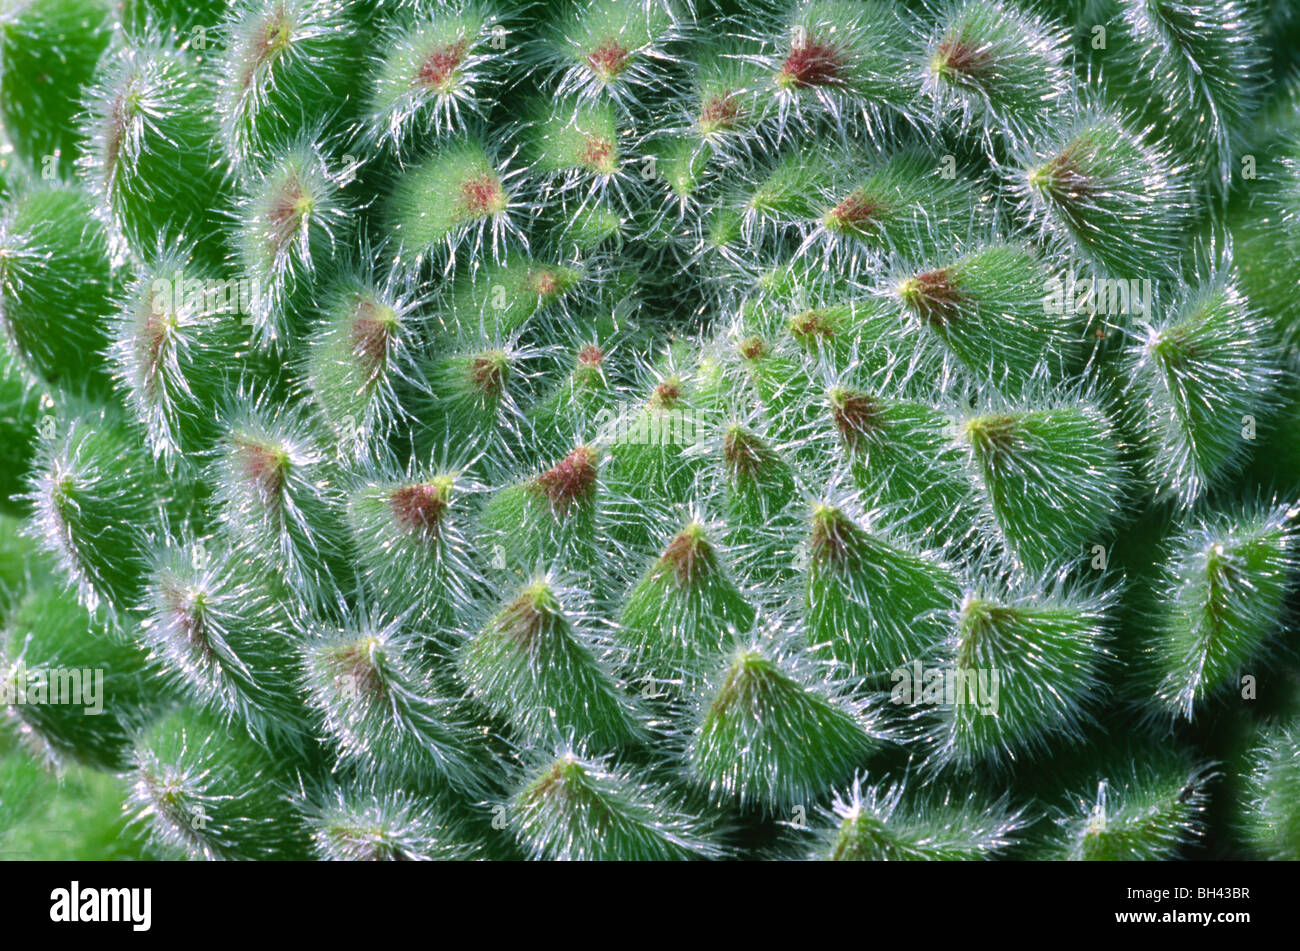 Abstract close up image of succulent plant with tightly packed hairy leaves. Stock Photo